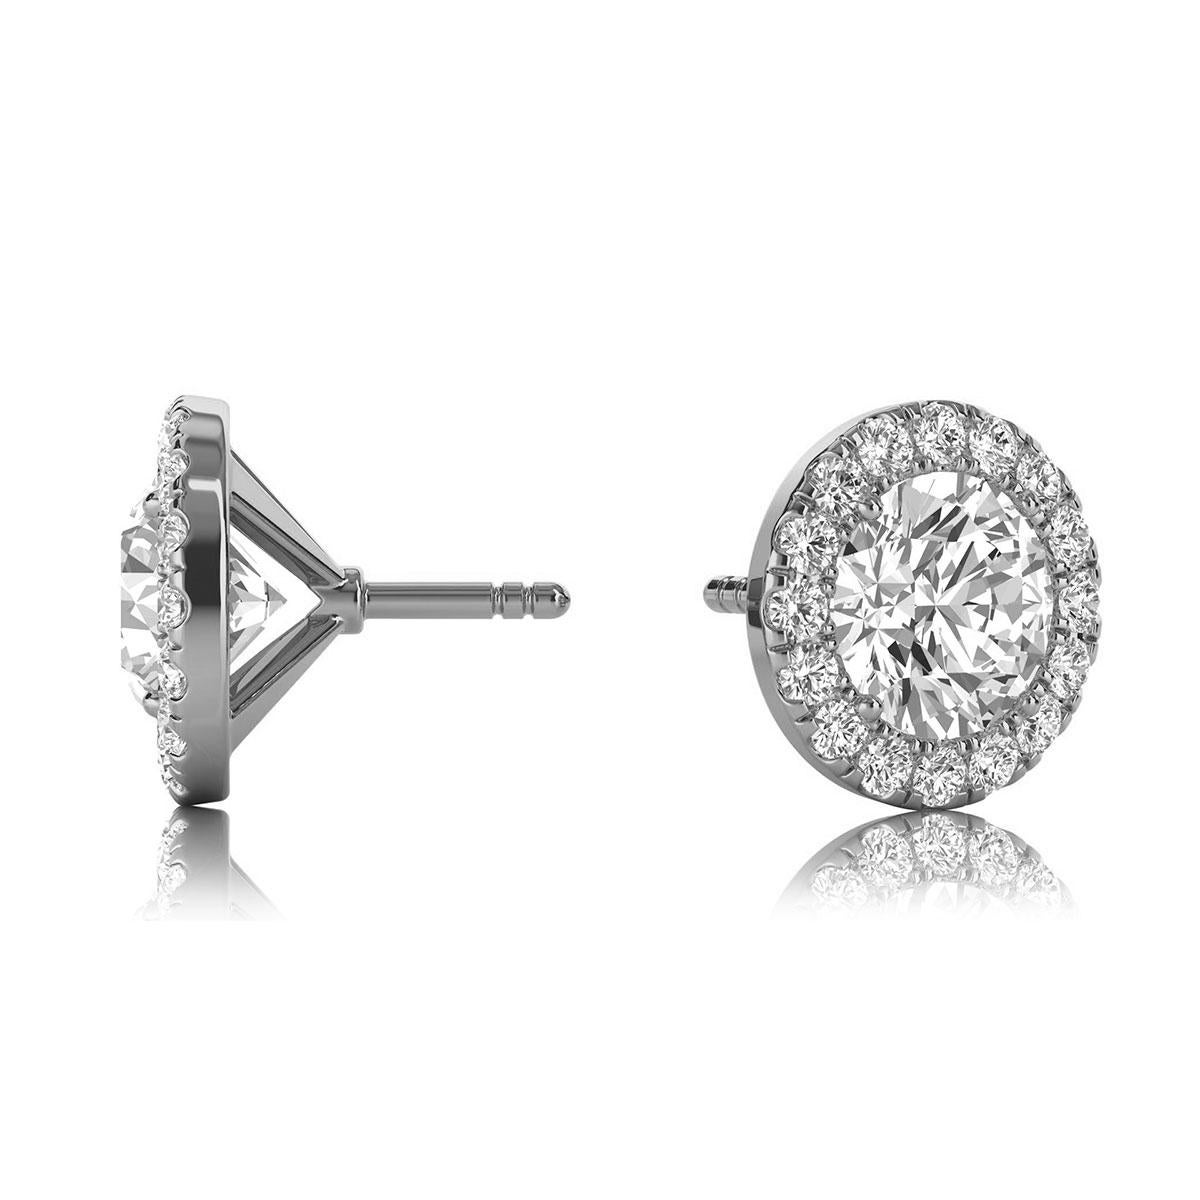 These delicate earrings feature two round shaped diamonds that are approximately 1.08-carat total weight (5.2 mm) encircled by a halo of perfectly matched 32 round brilliant diamonds in about 0.32-carat total weight. The earrings are measuring at 8